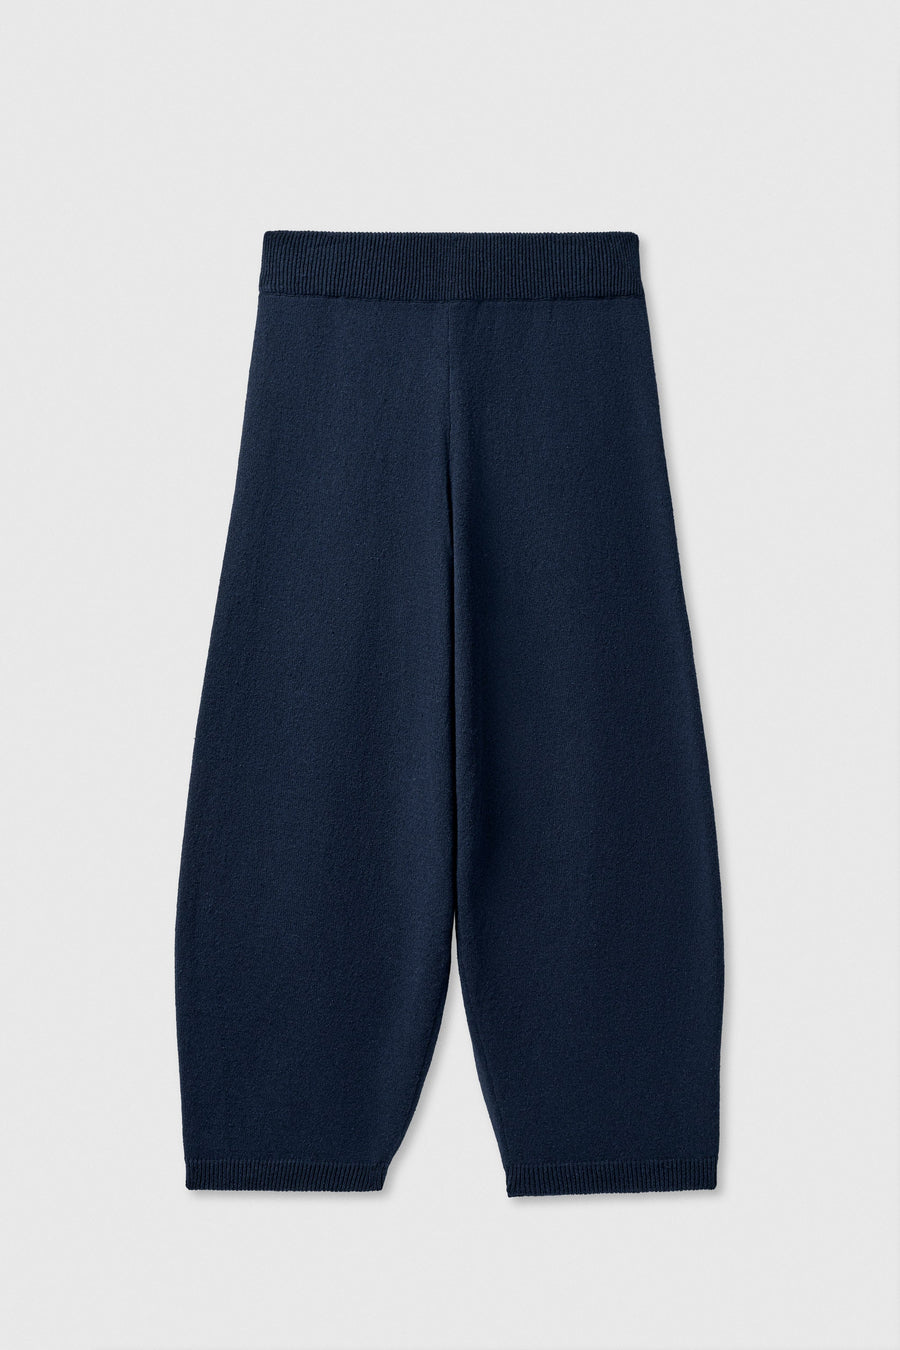 COTTON KNITTED PANTS - NAVY